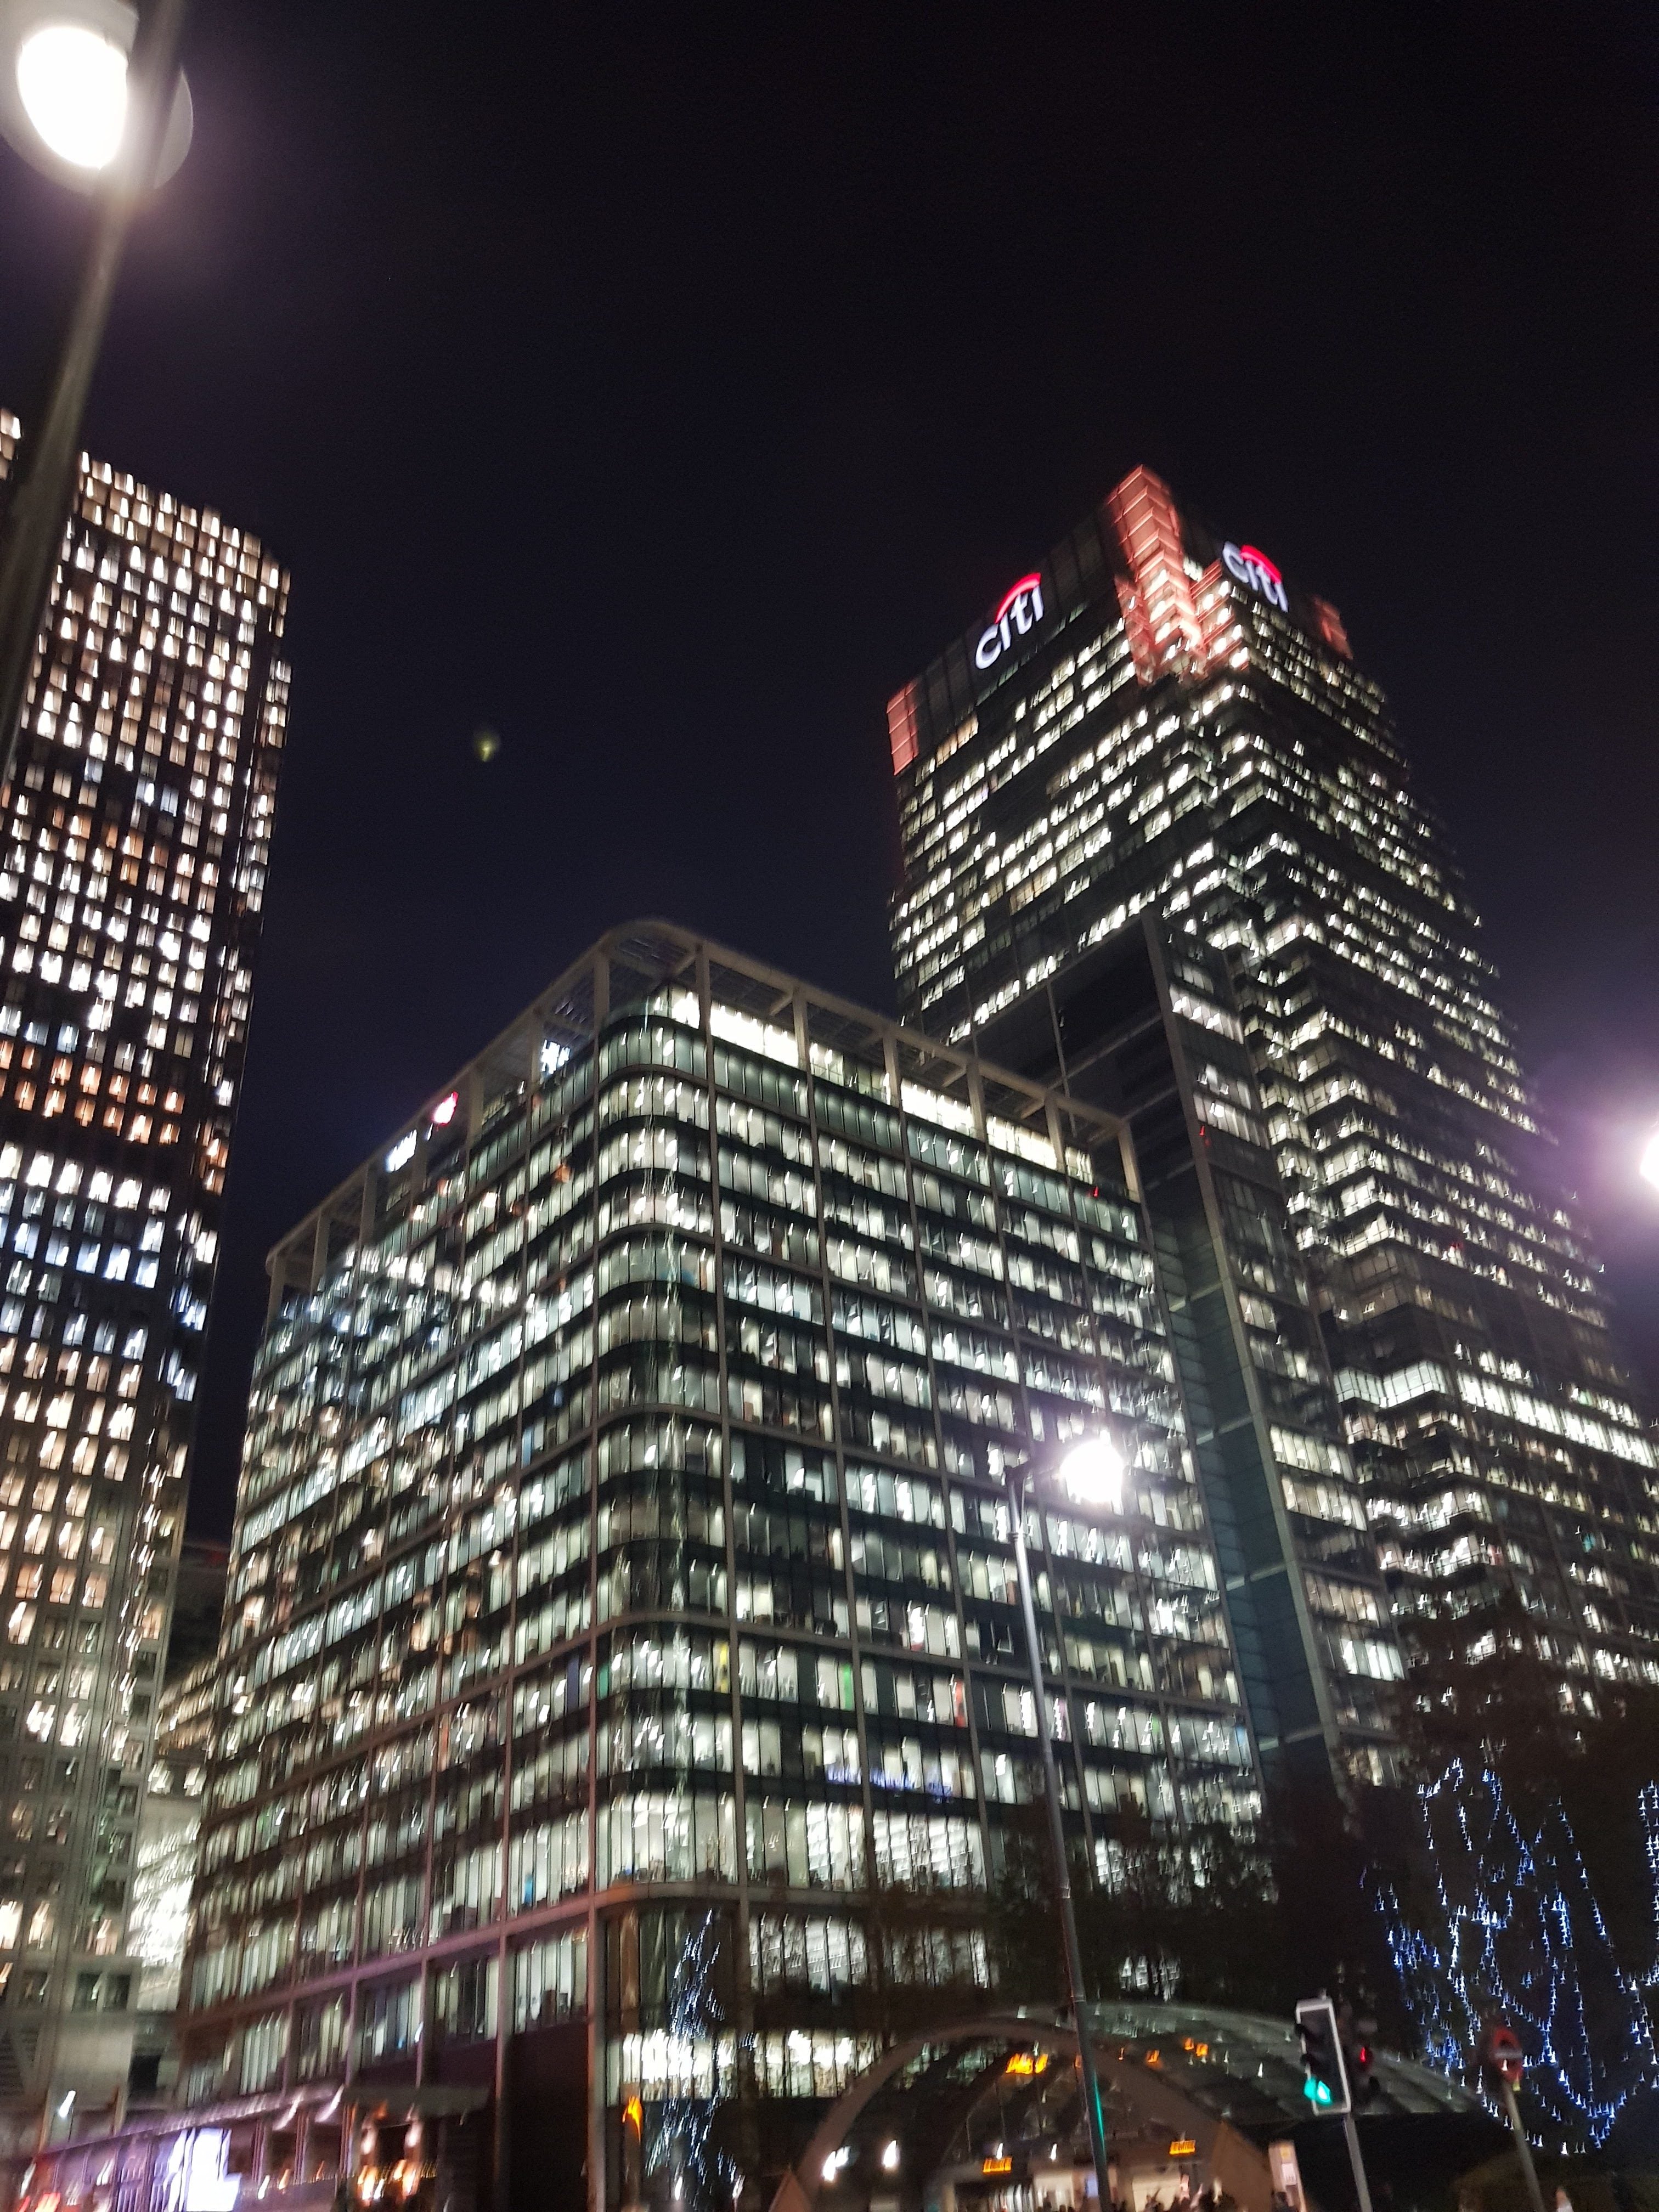 Nighttime cityscape with illuminated office buildings.